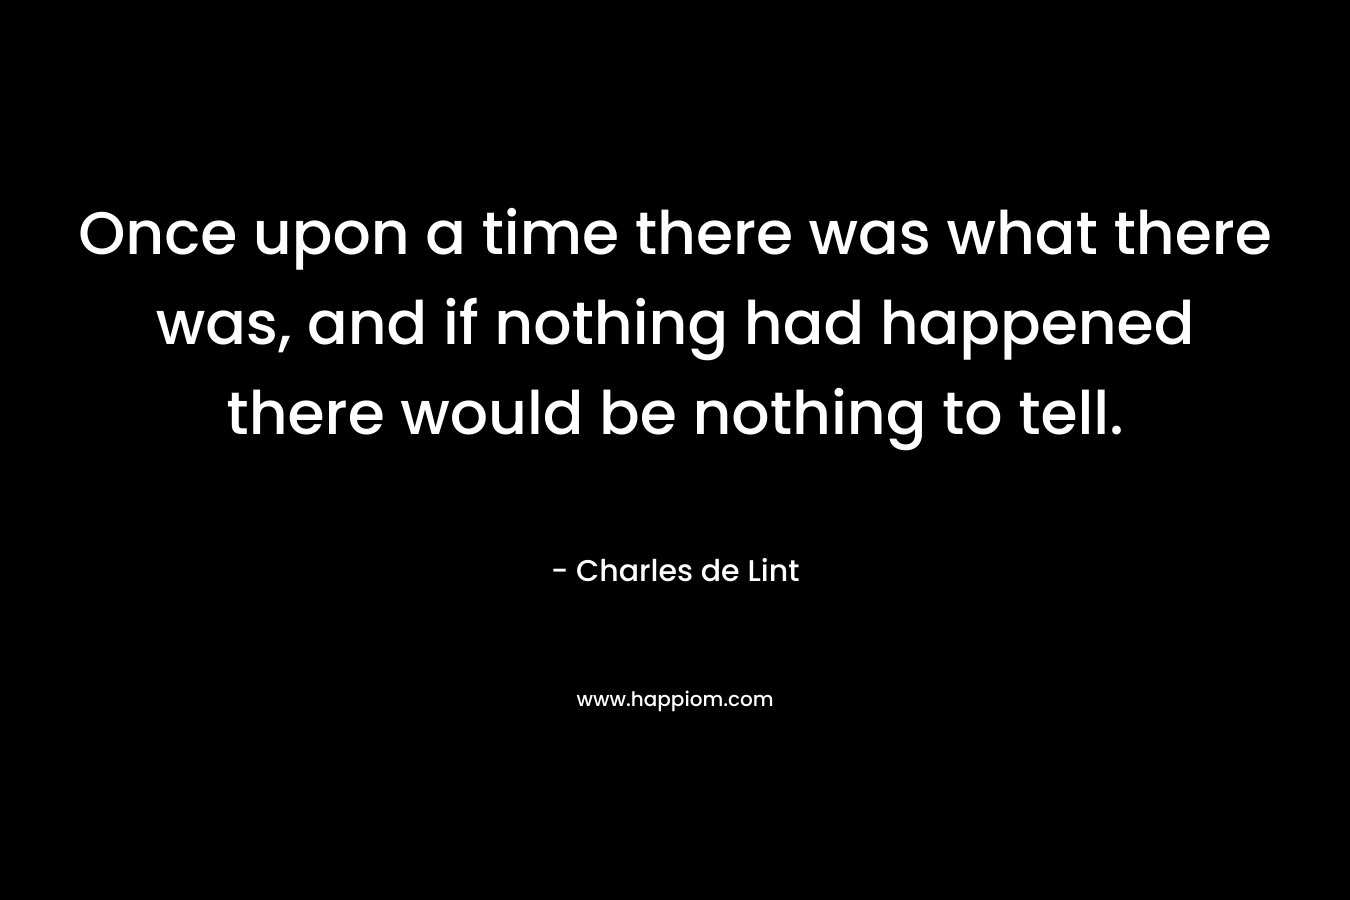 Once upon a time there was what there was, and if nothing had happened there would be nothing to tell. – Charles de Lint